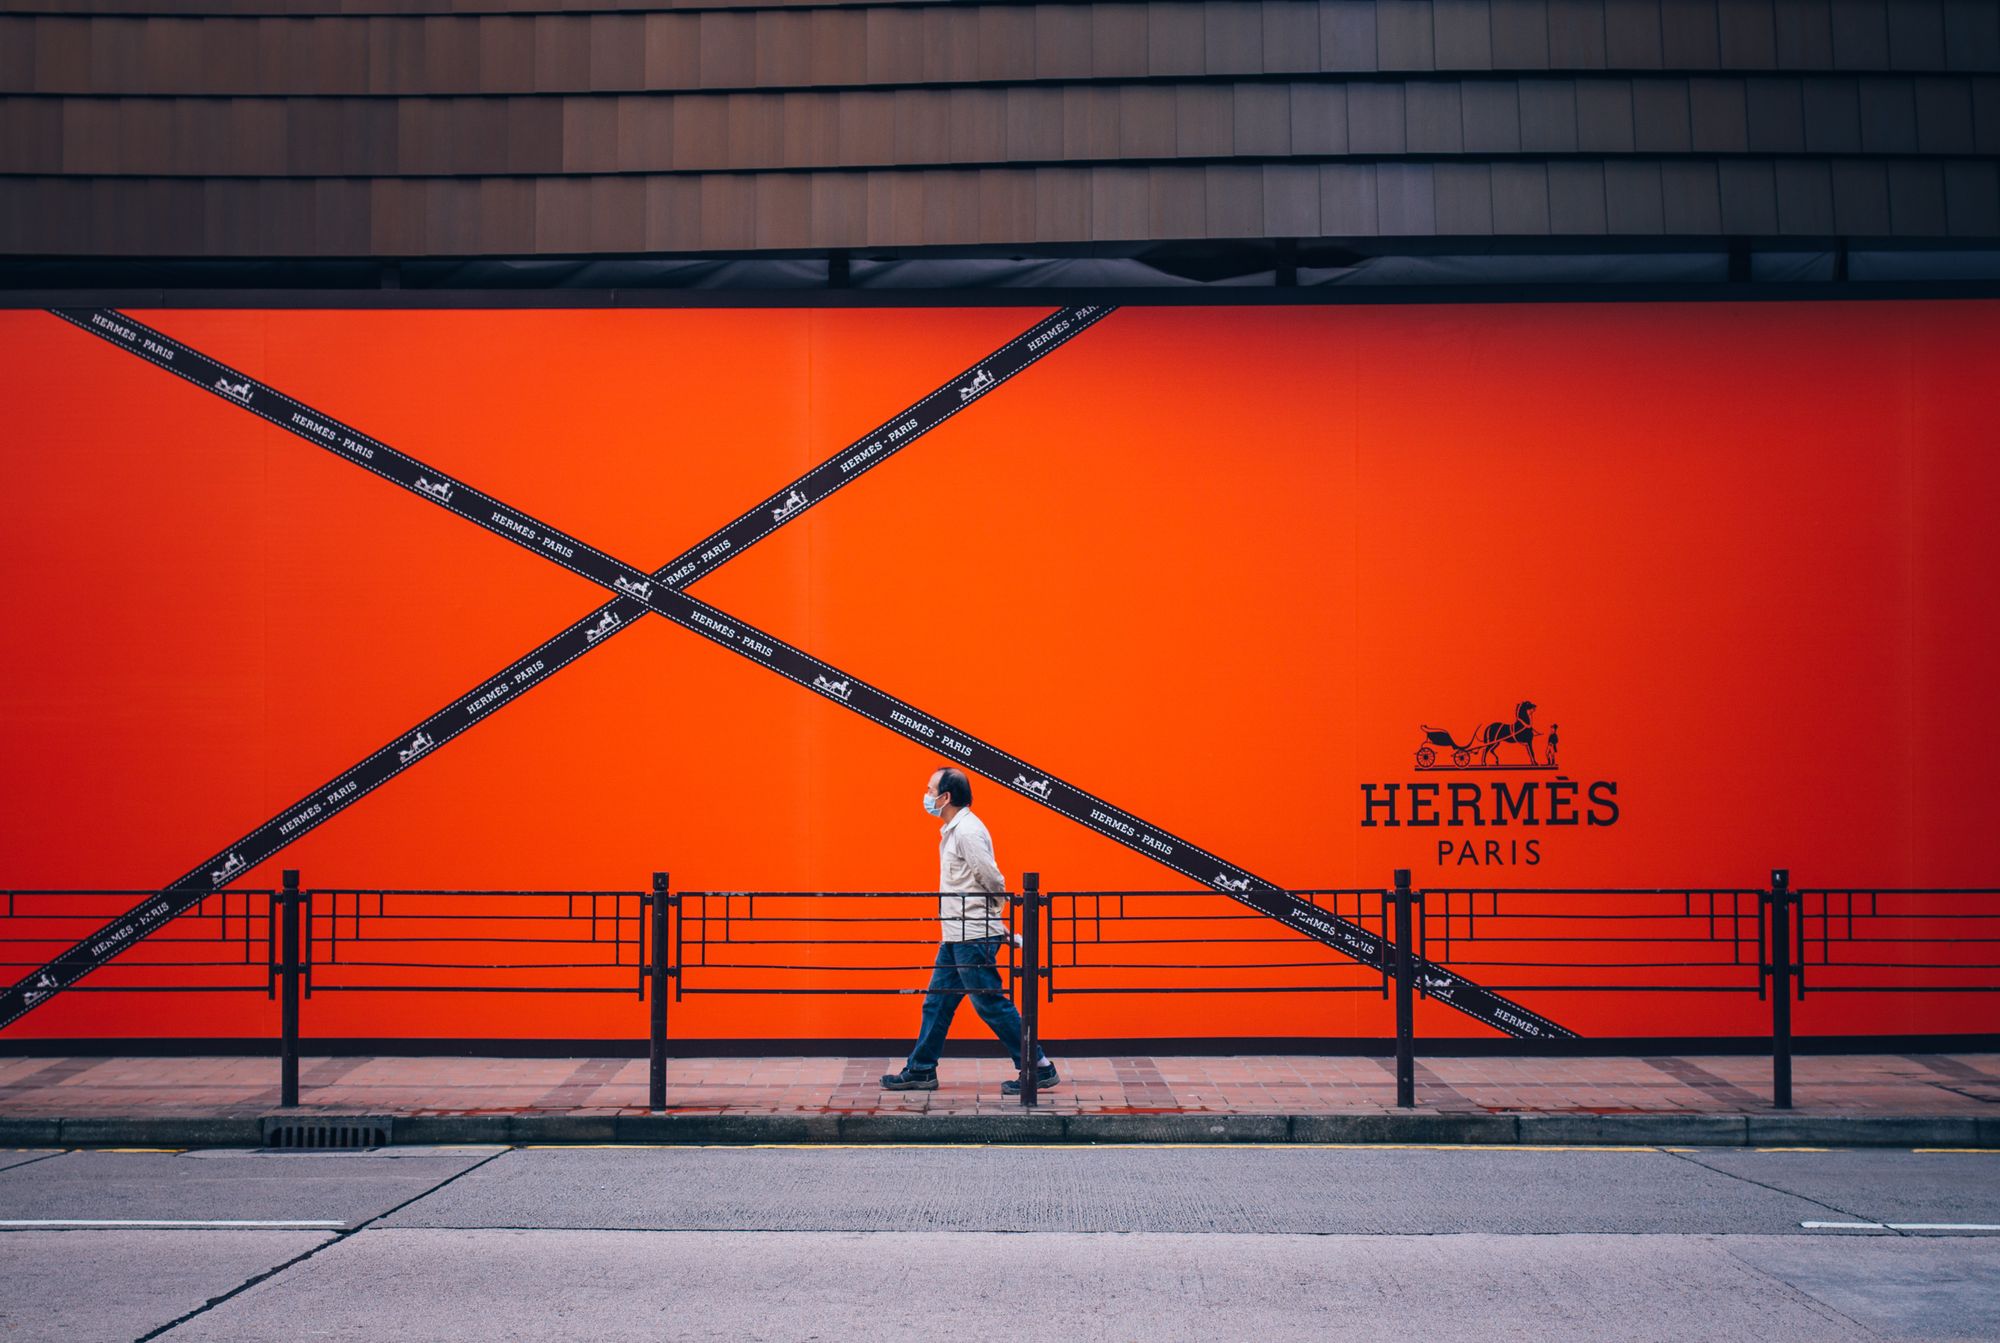  cover image of Hermes, A Valuable Luxury Business